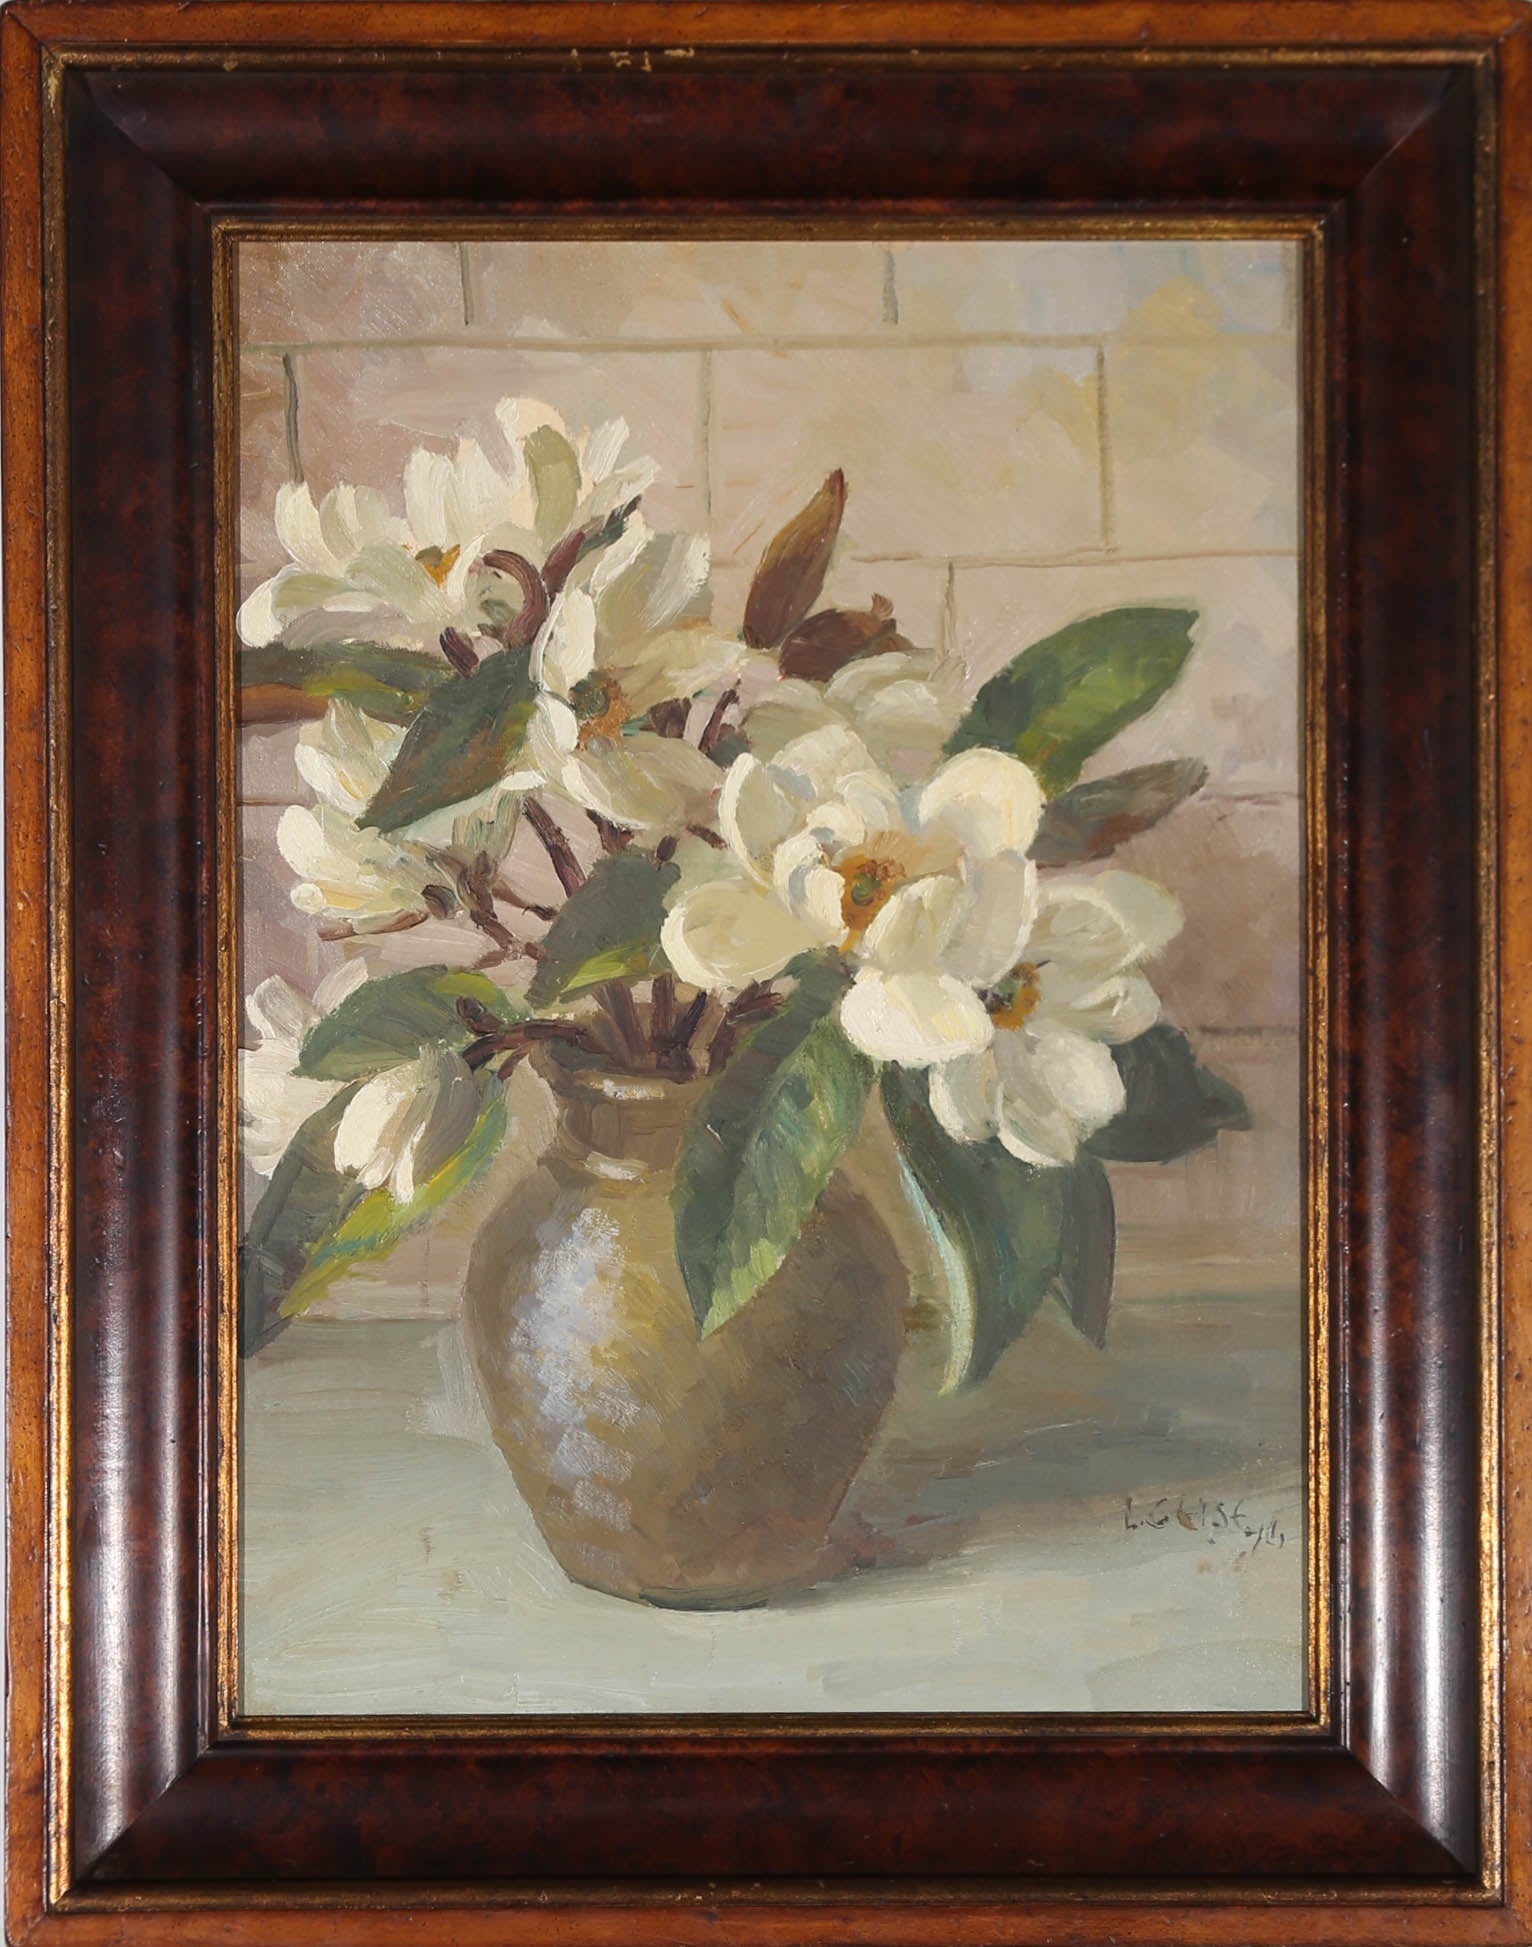 This beautiful impressionistic study by New Zealand artist Ida G. Eise MBE (1894-1978), depicts a still life of cut lilies flowering on a sunny kitchen counter. The painting is signed and dated to the lower right and has been attractively presented